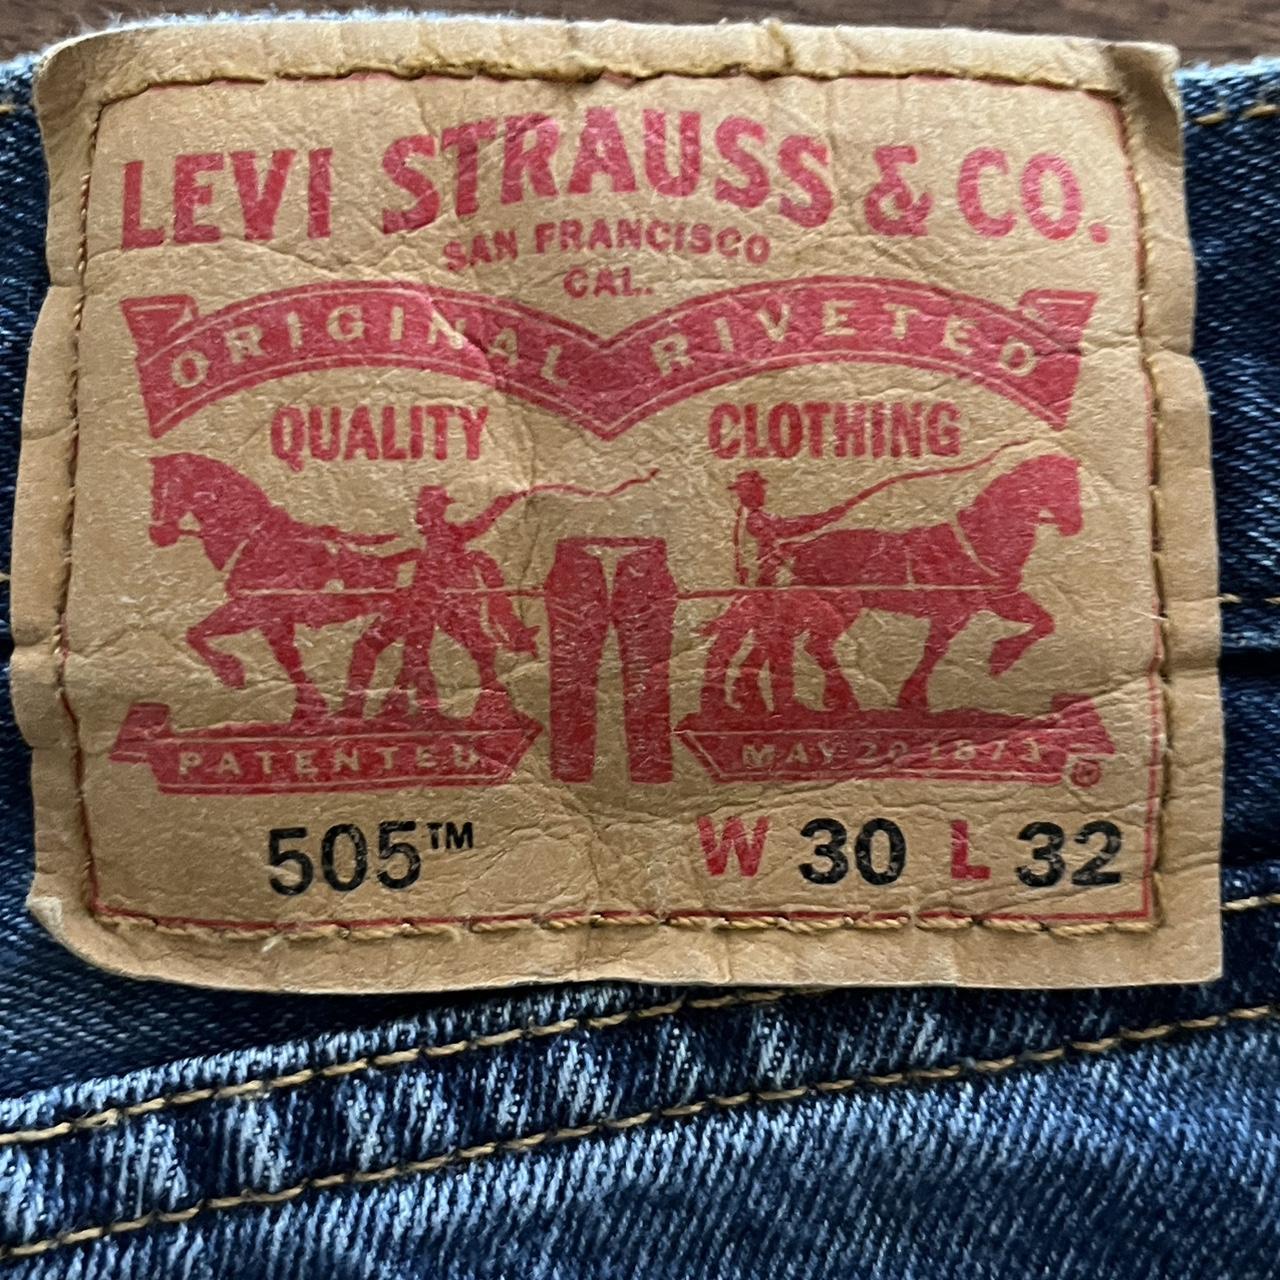 Spider hello kitty painted vintage Levi 505 jeans - Depop